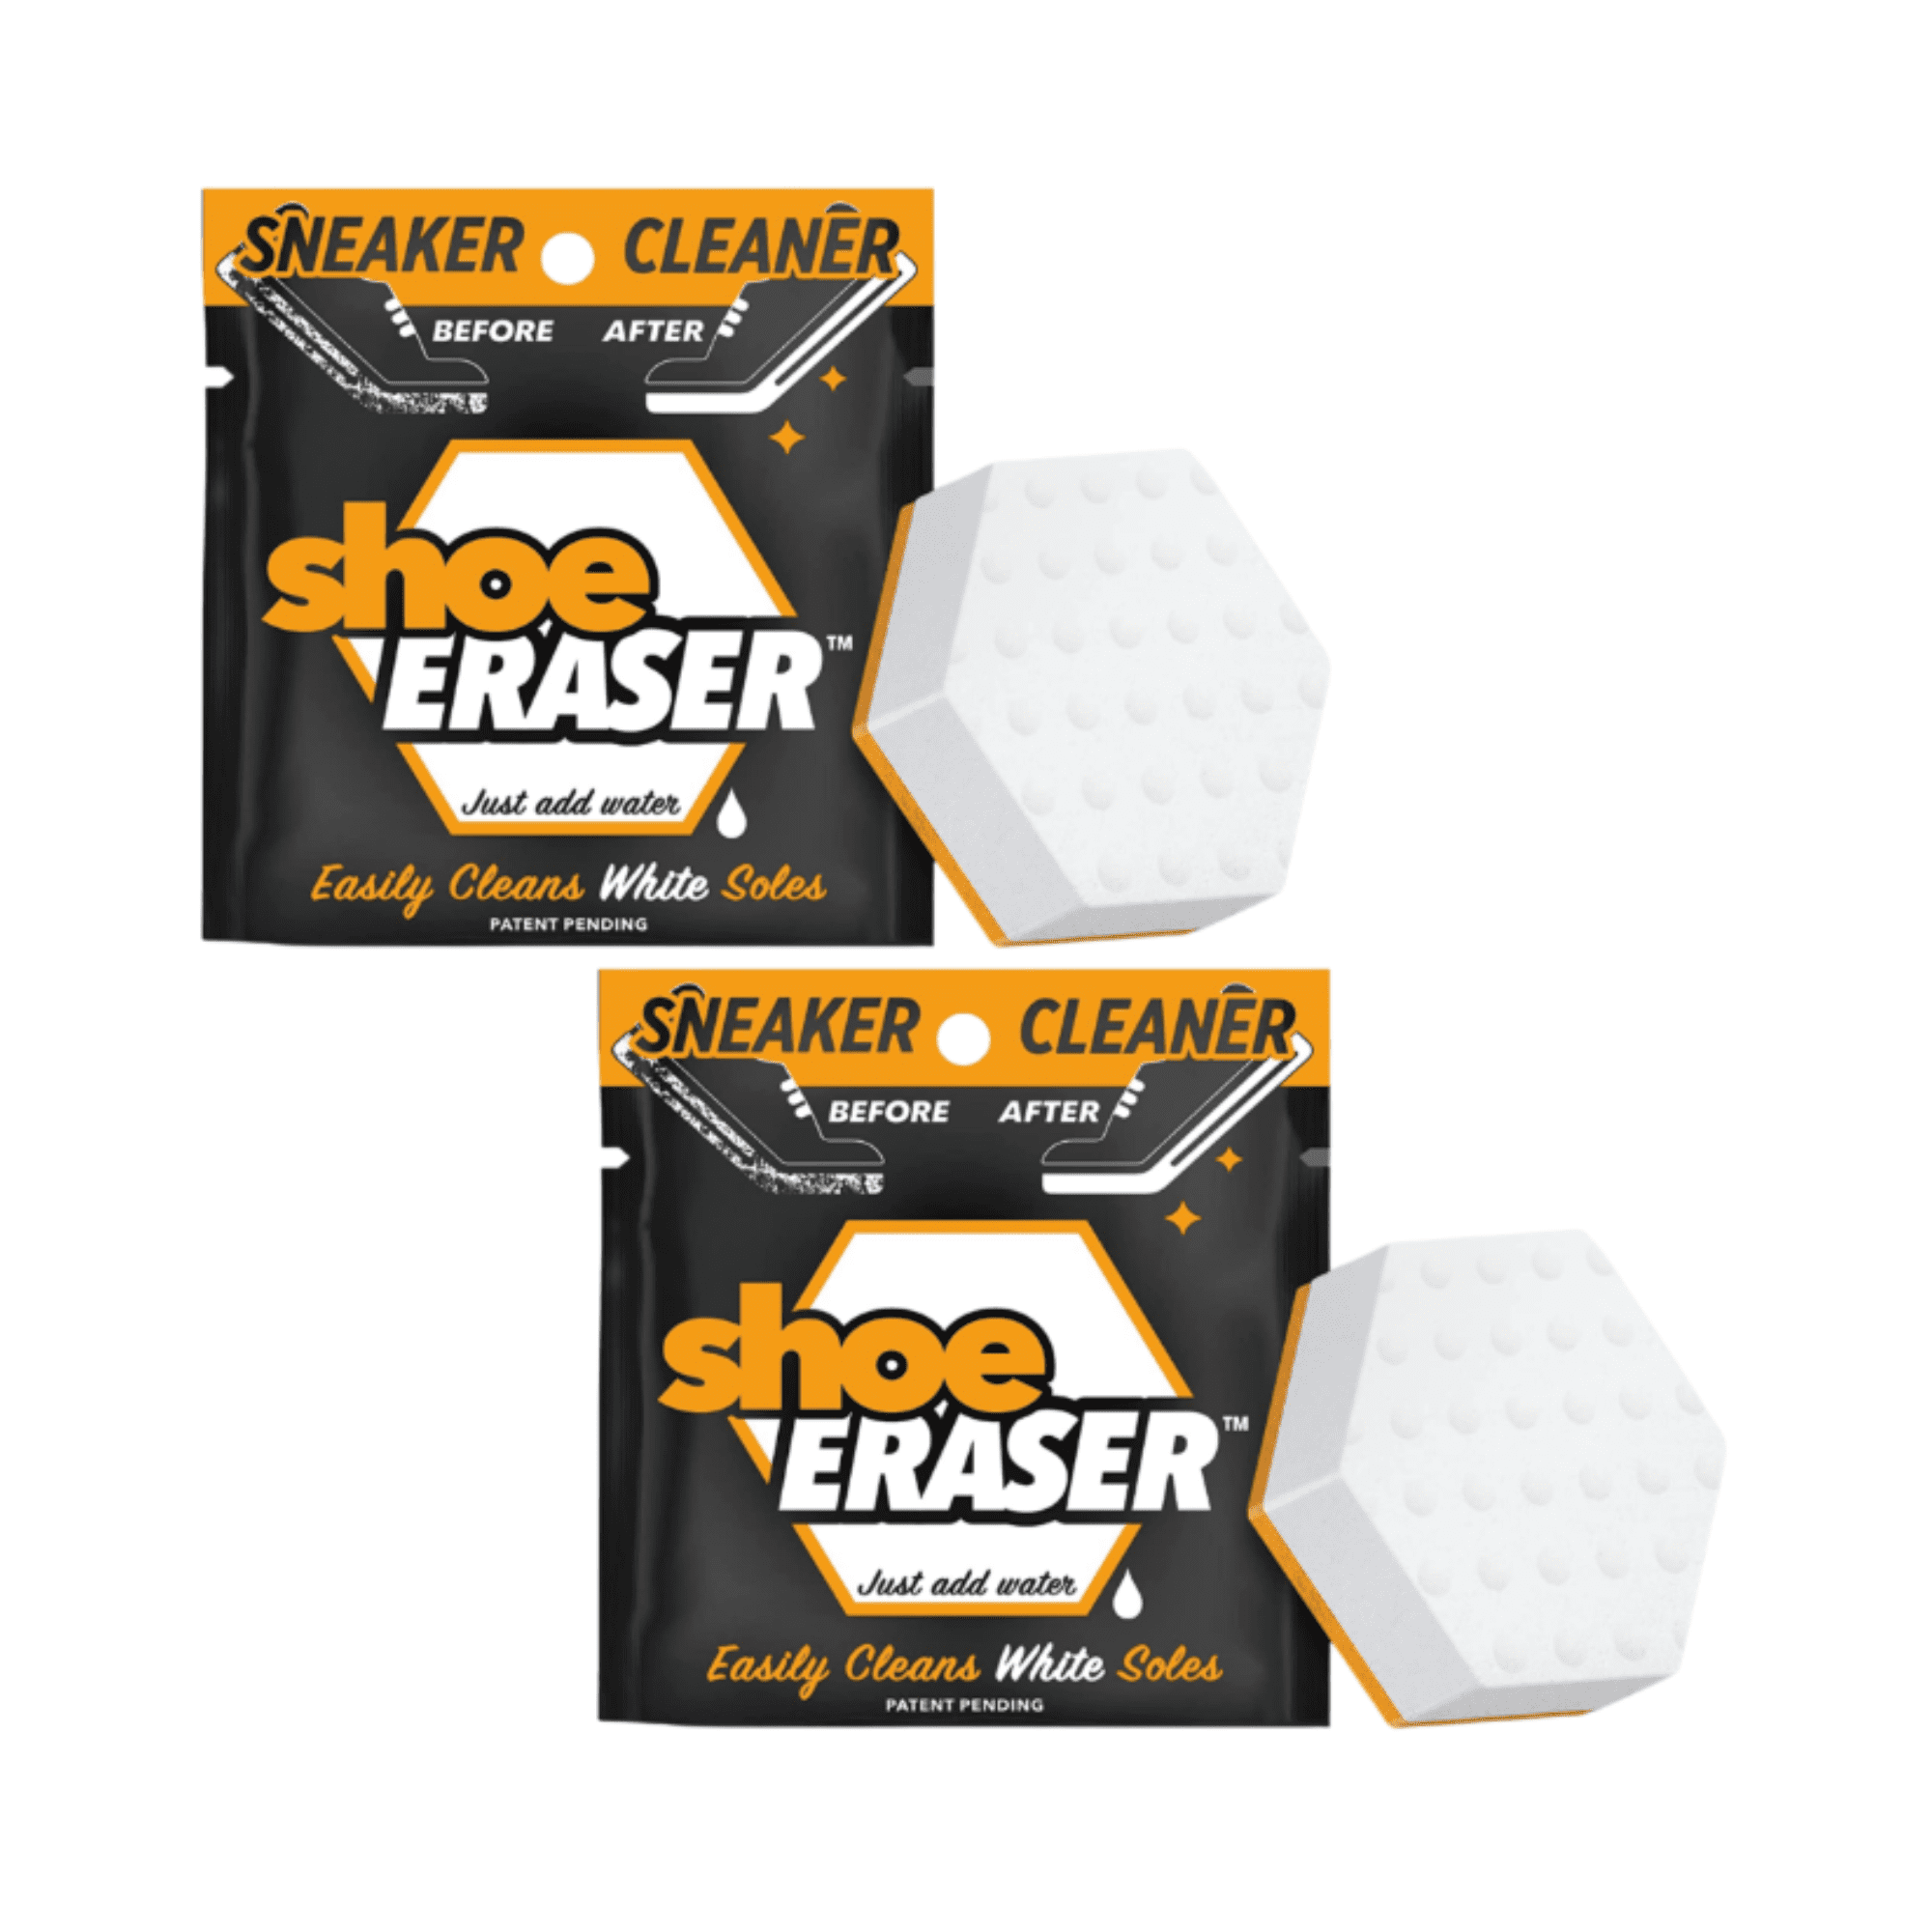 Sneakers Shoes Cleaning Sponge Eraser, Reusable White Shoe Foam Cleaner Kit  Pad Brush Shoe Care, Easily Cleans White Soles(Pack of 2)